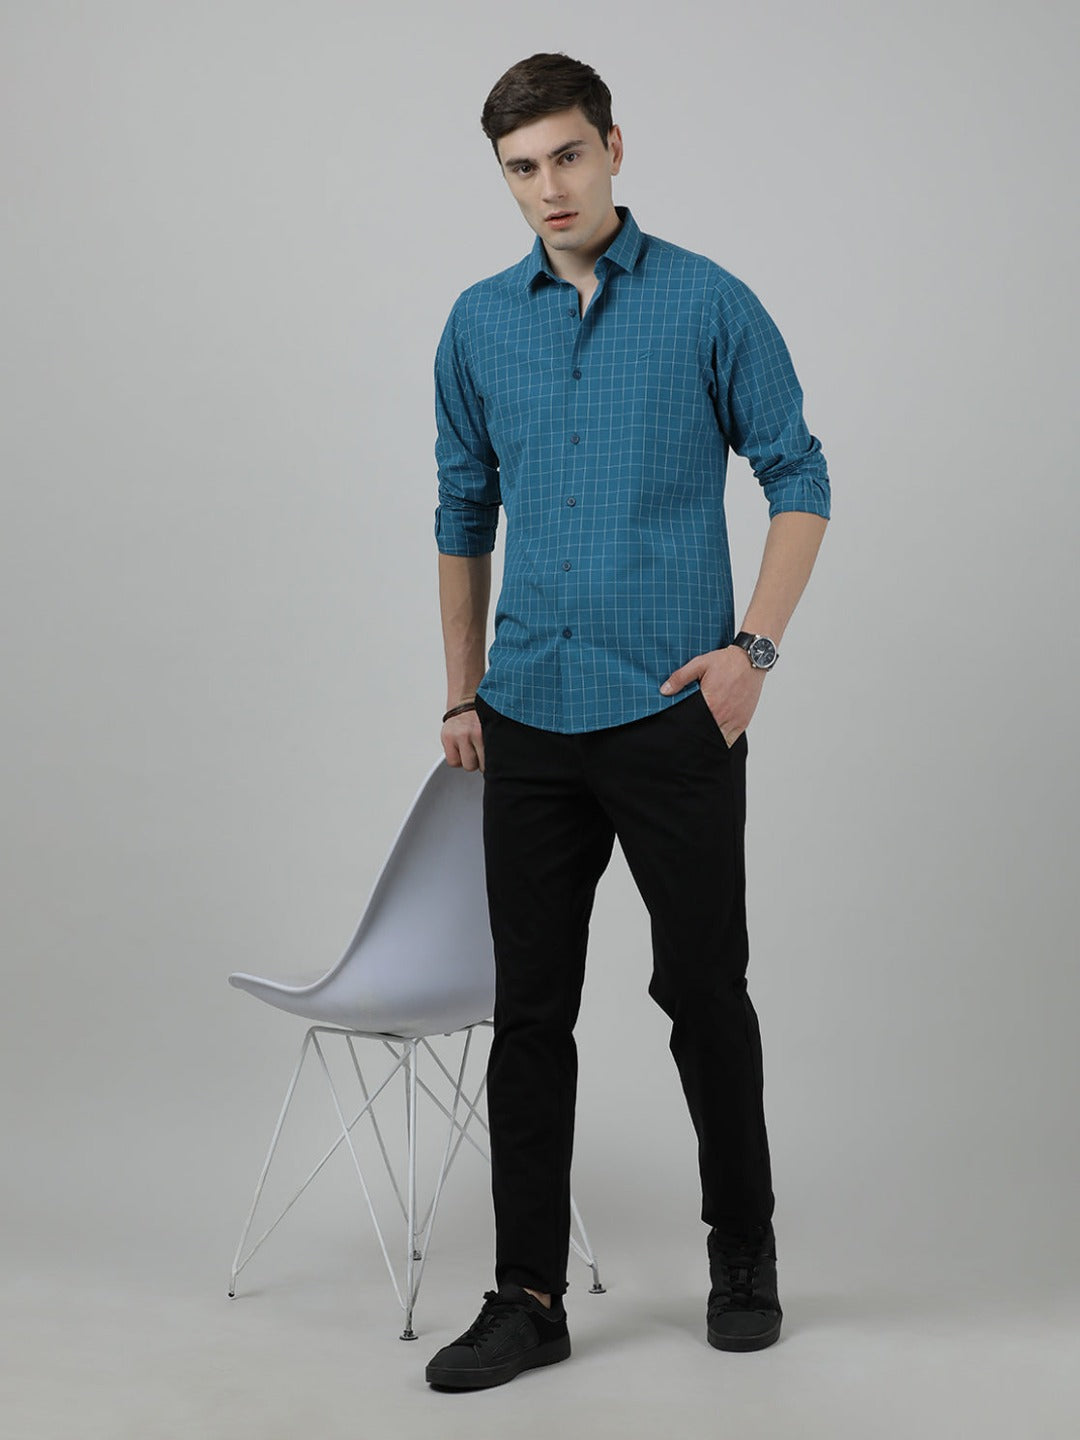 Crocodile Casual Full Sleeve Slim Fit Checked Shirt Teal for Men